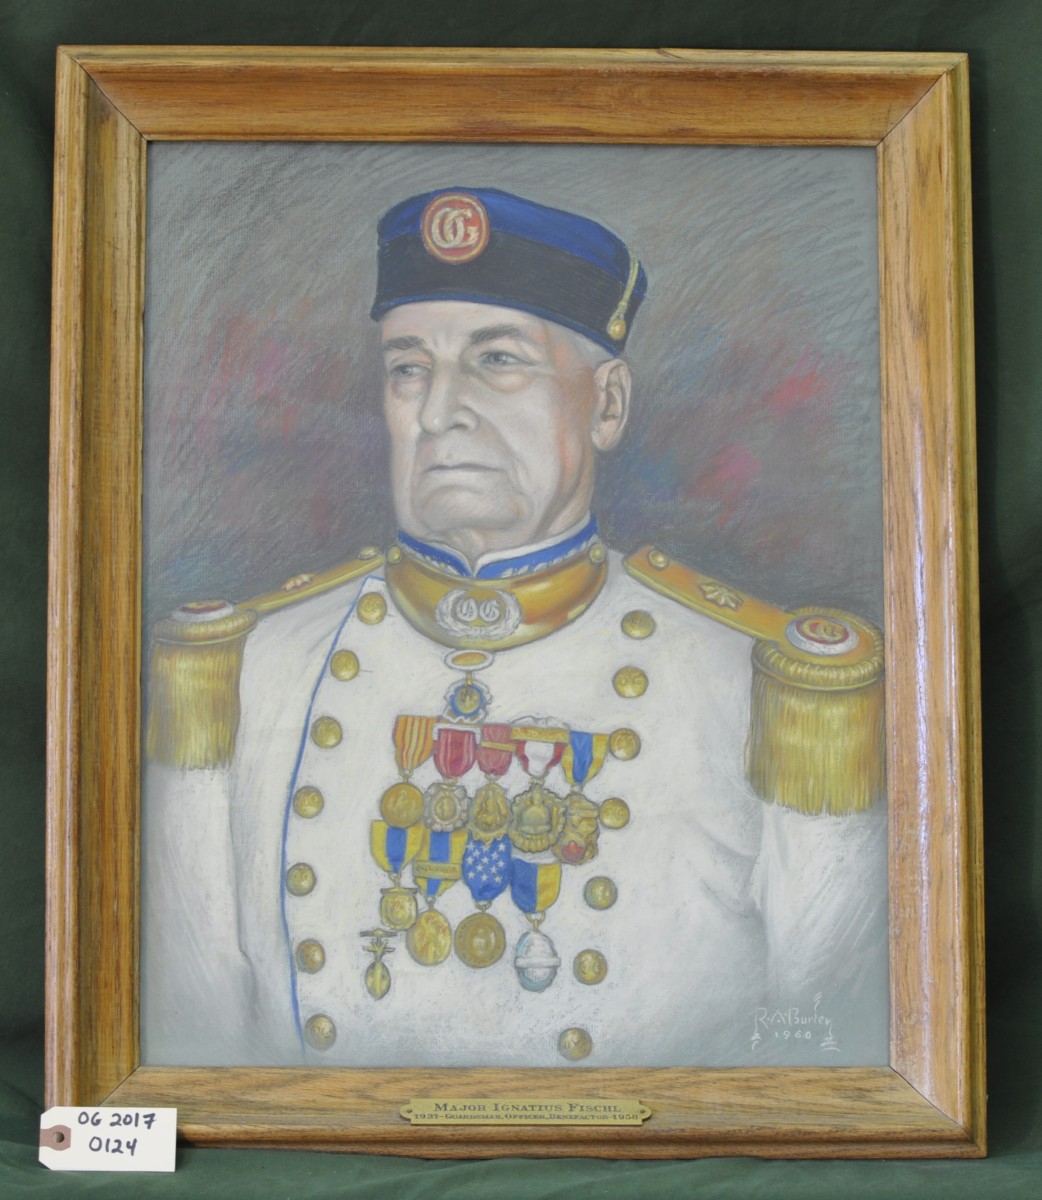 Portrait of Major Ignatius Fischl by R.A. Burley 